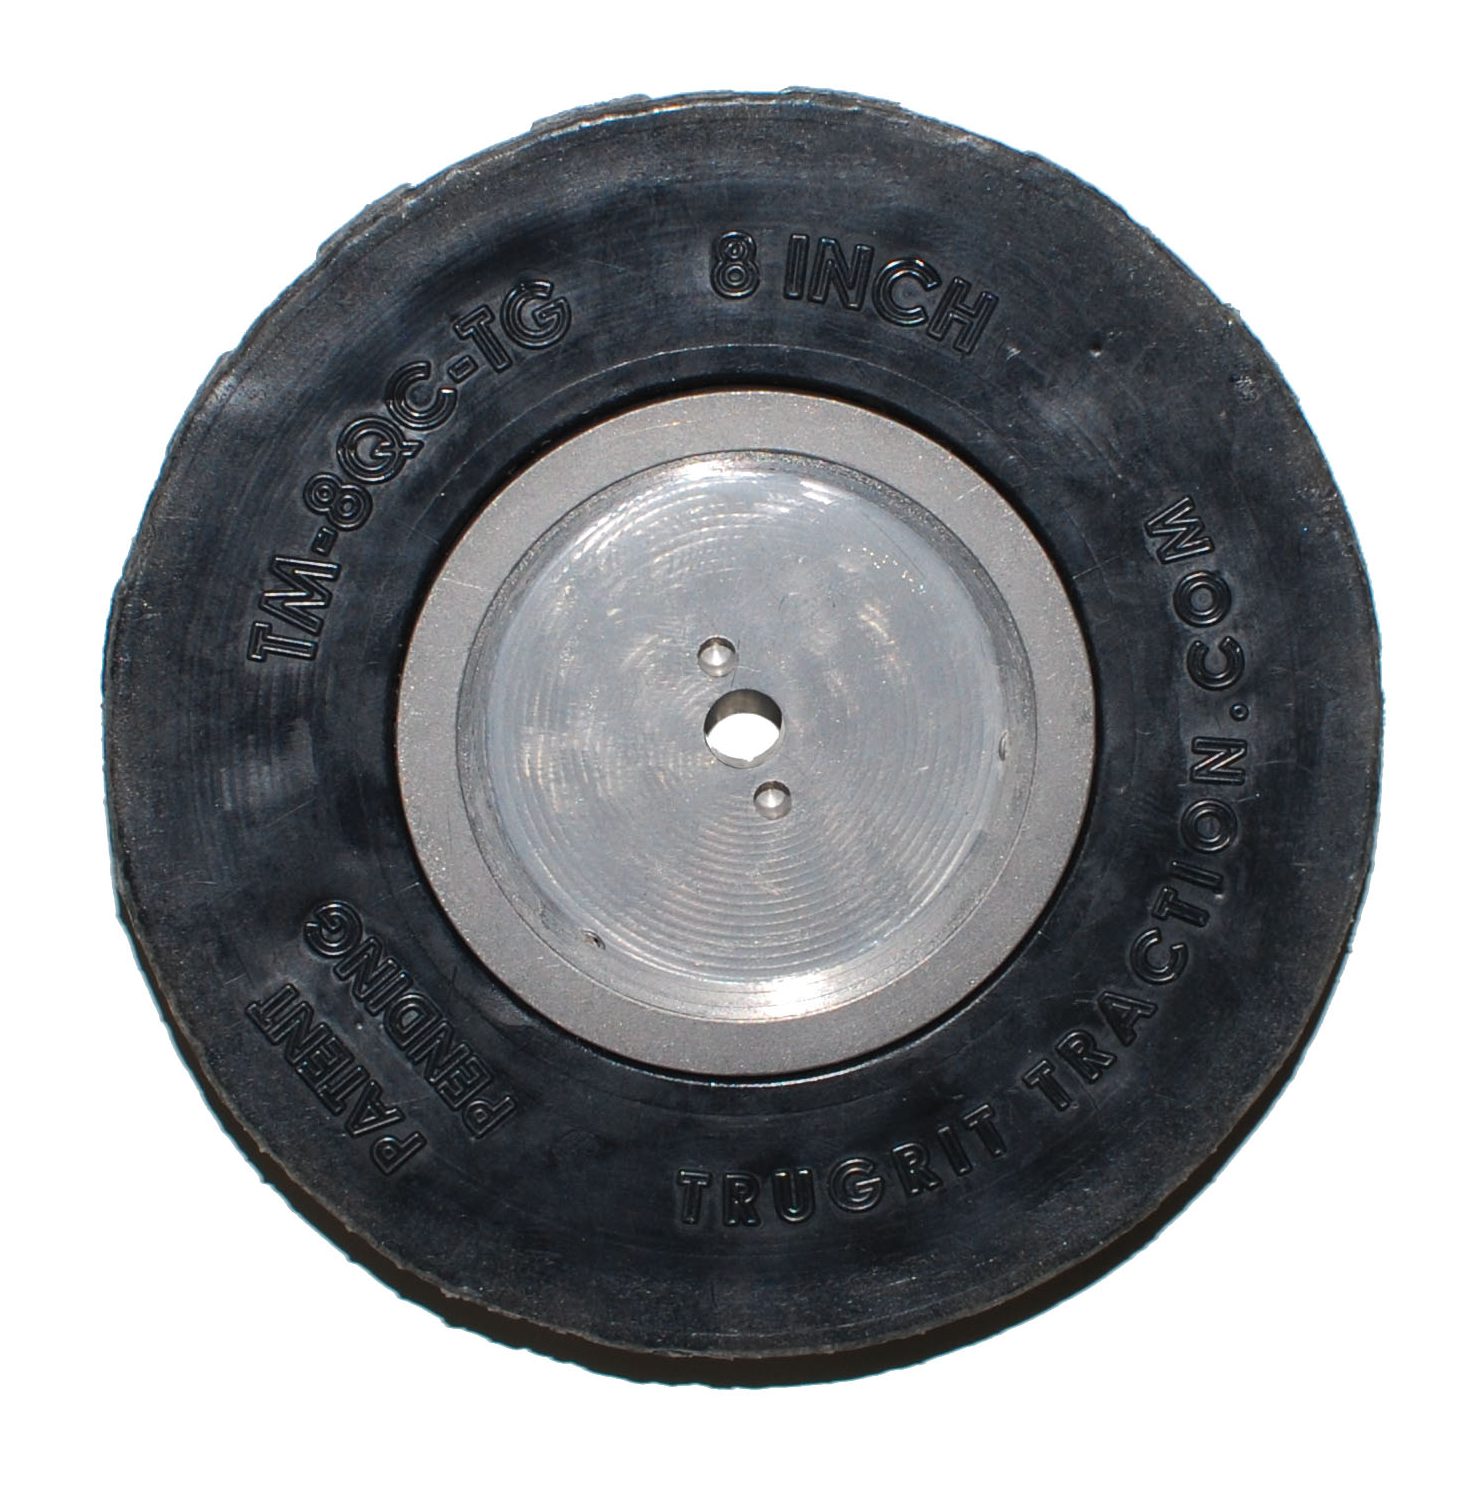 tg RST wheel parts by TruGrit Traction